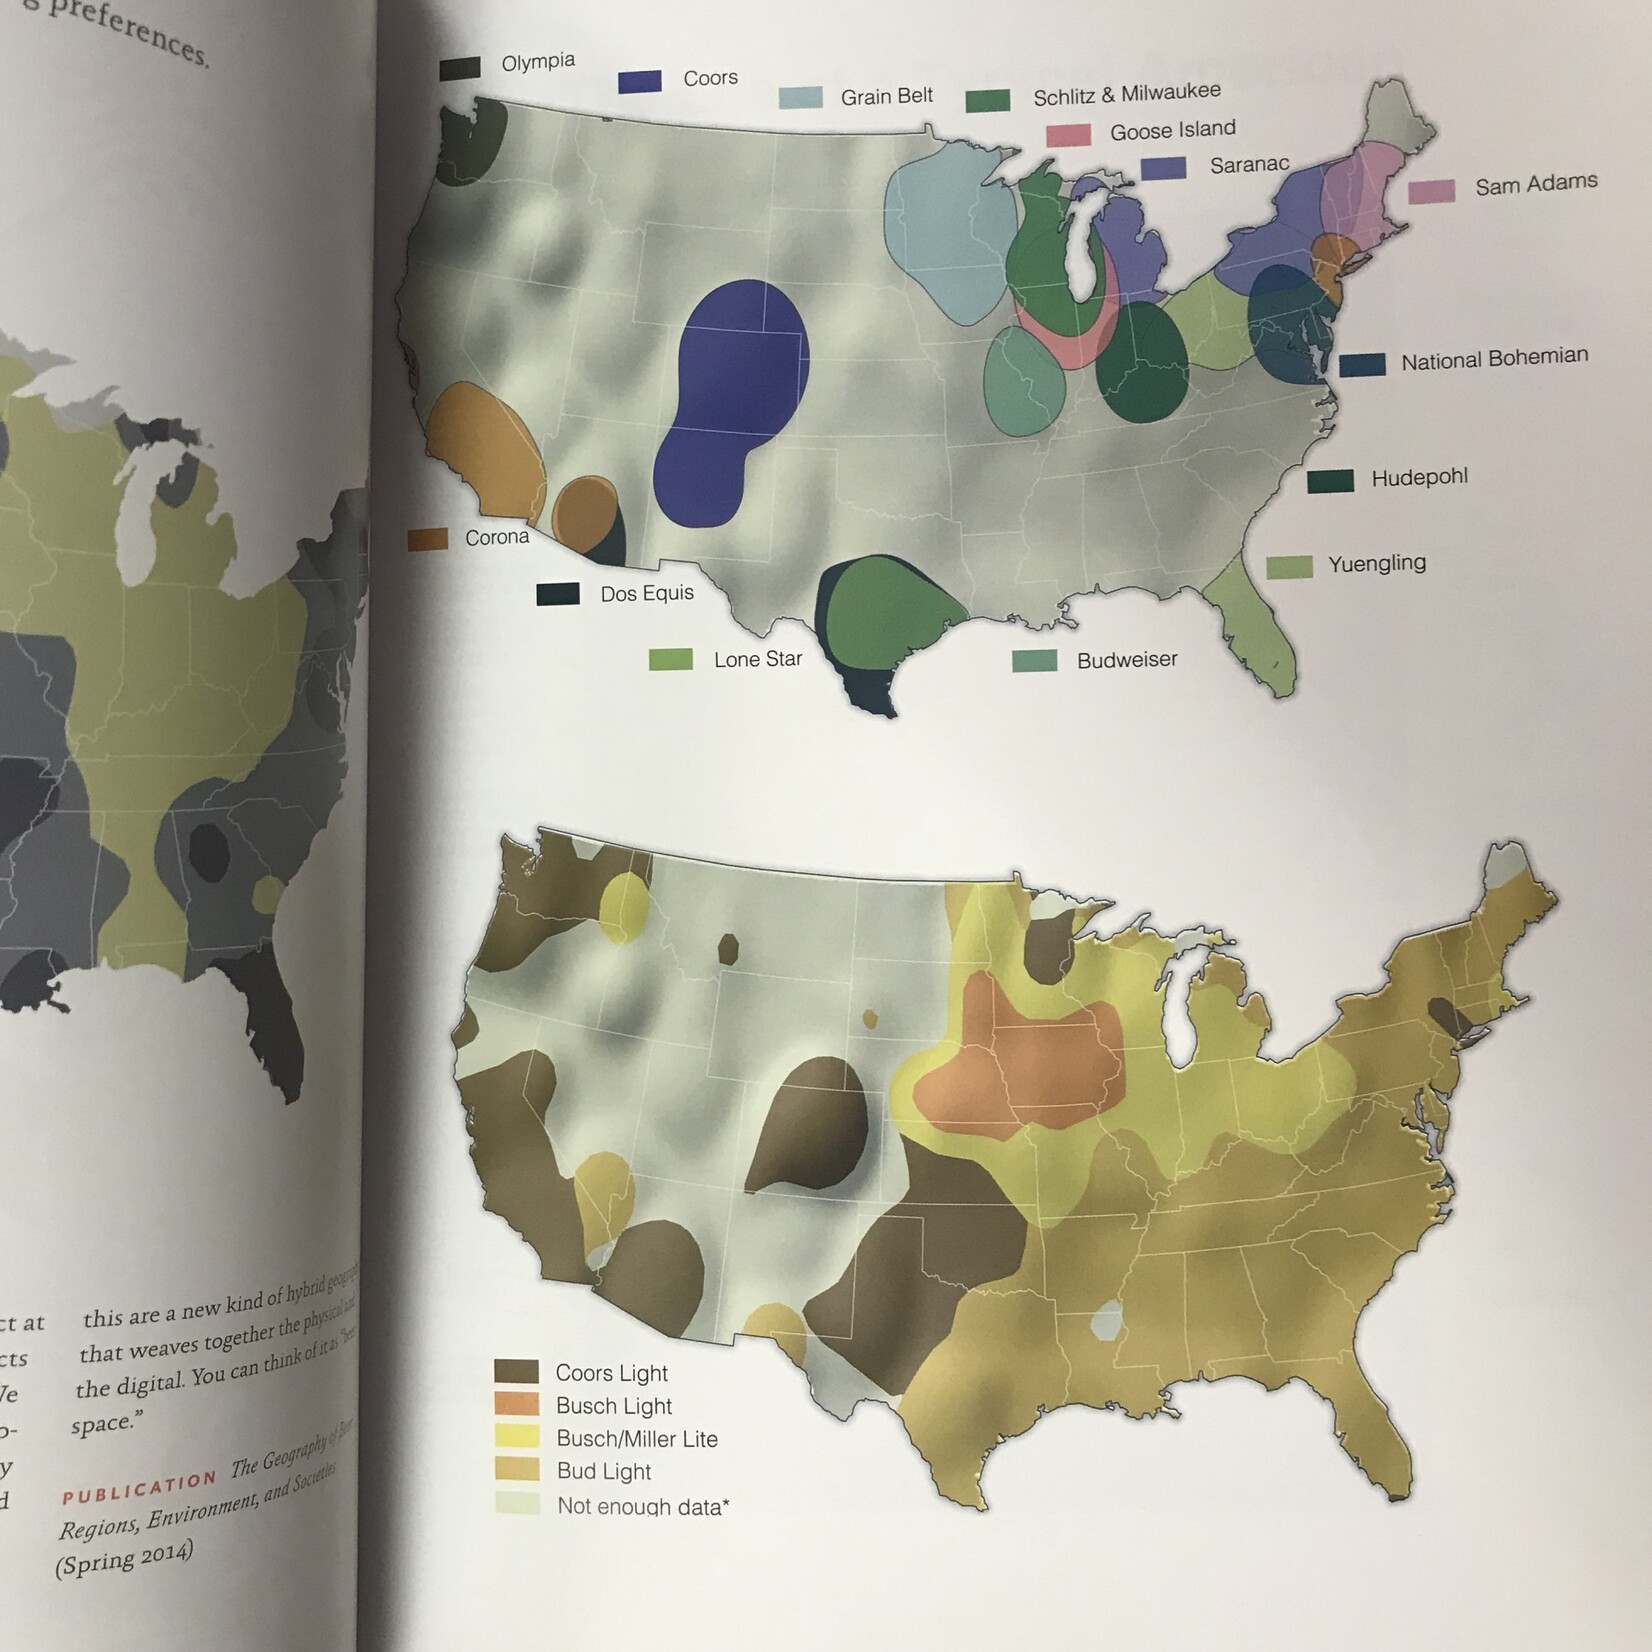 Gareth Cook (Editor) - The Best American Infographics 2015 - Paperback (USED)